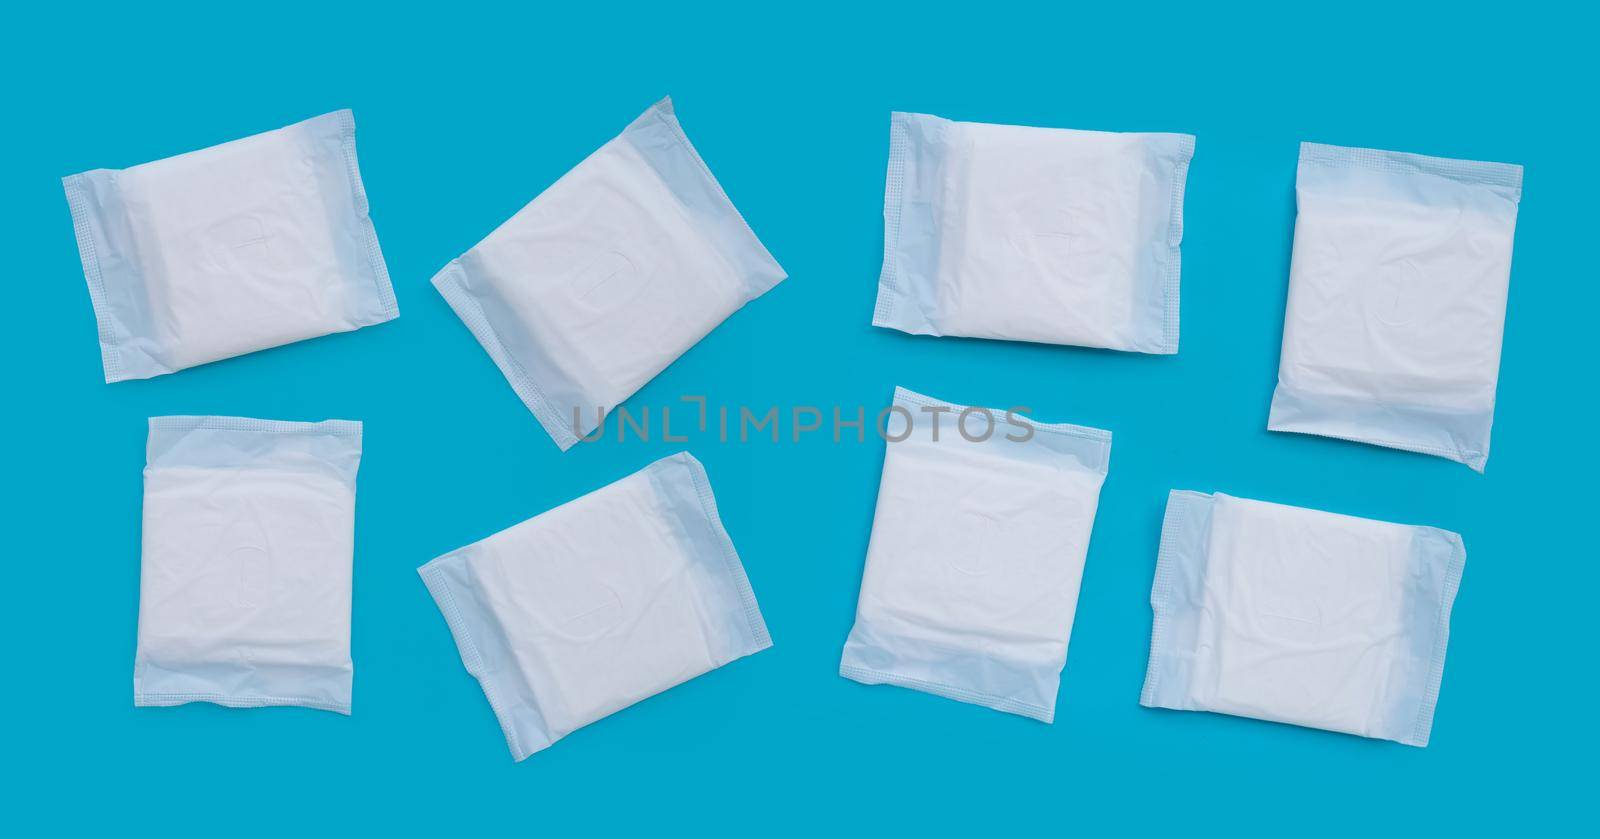 White sanitary pads on blue background. by Bowonpat